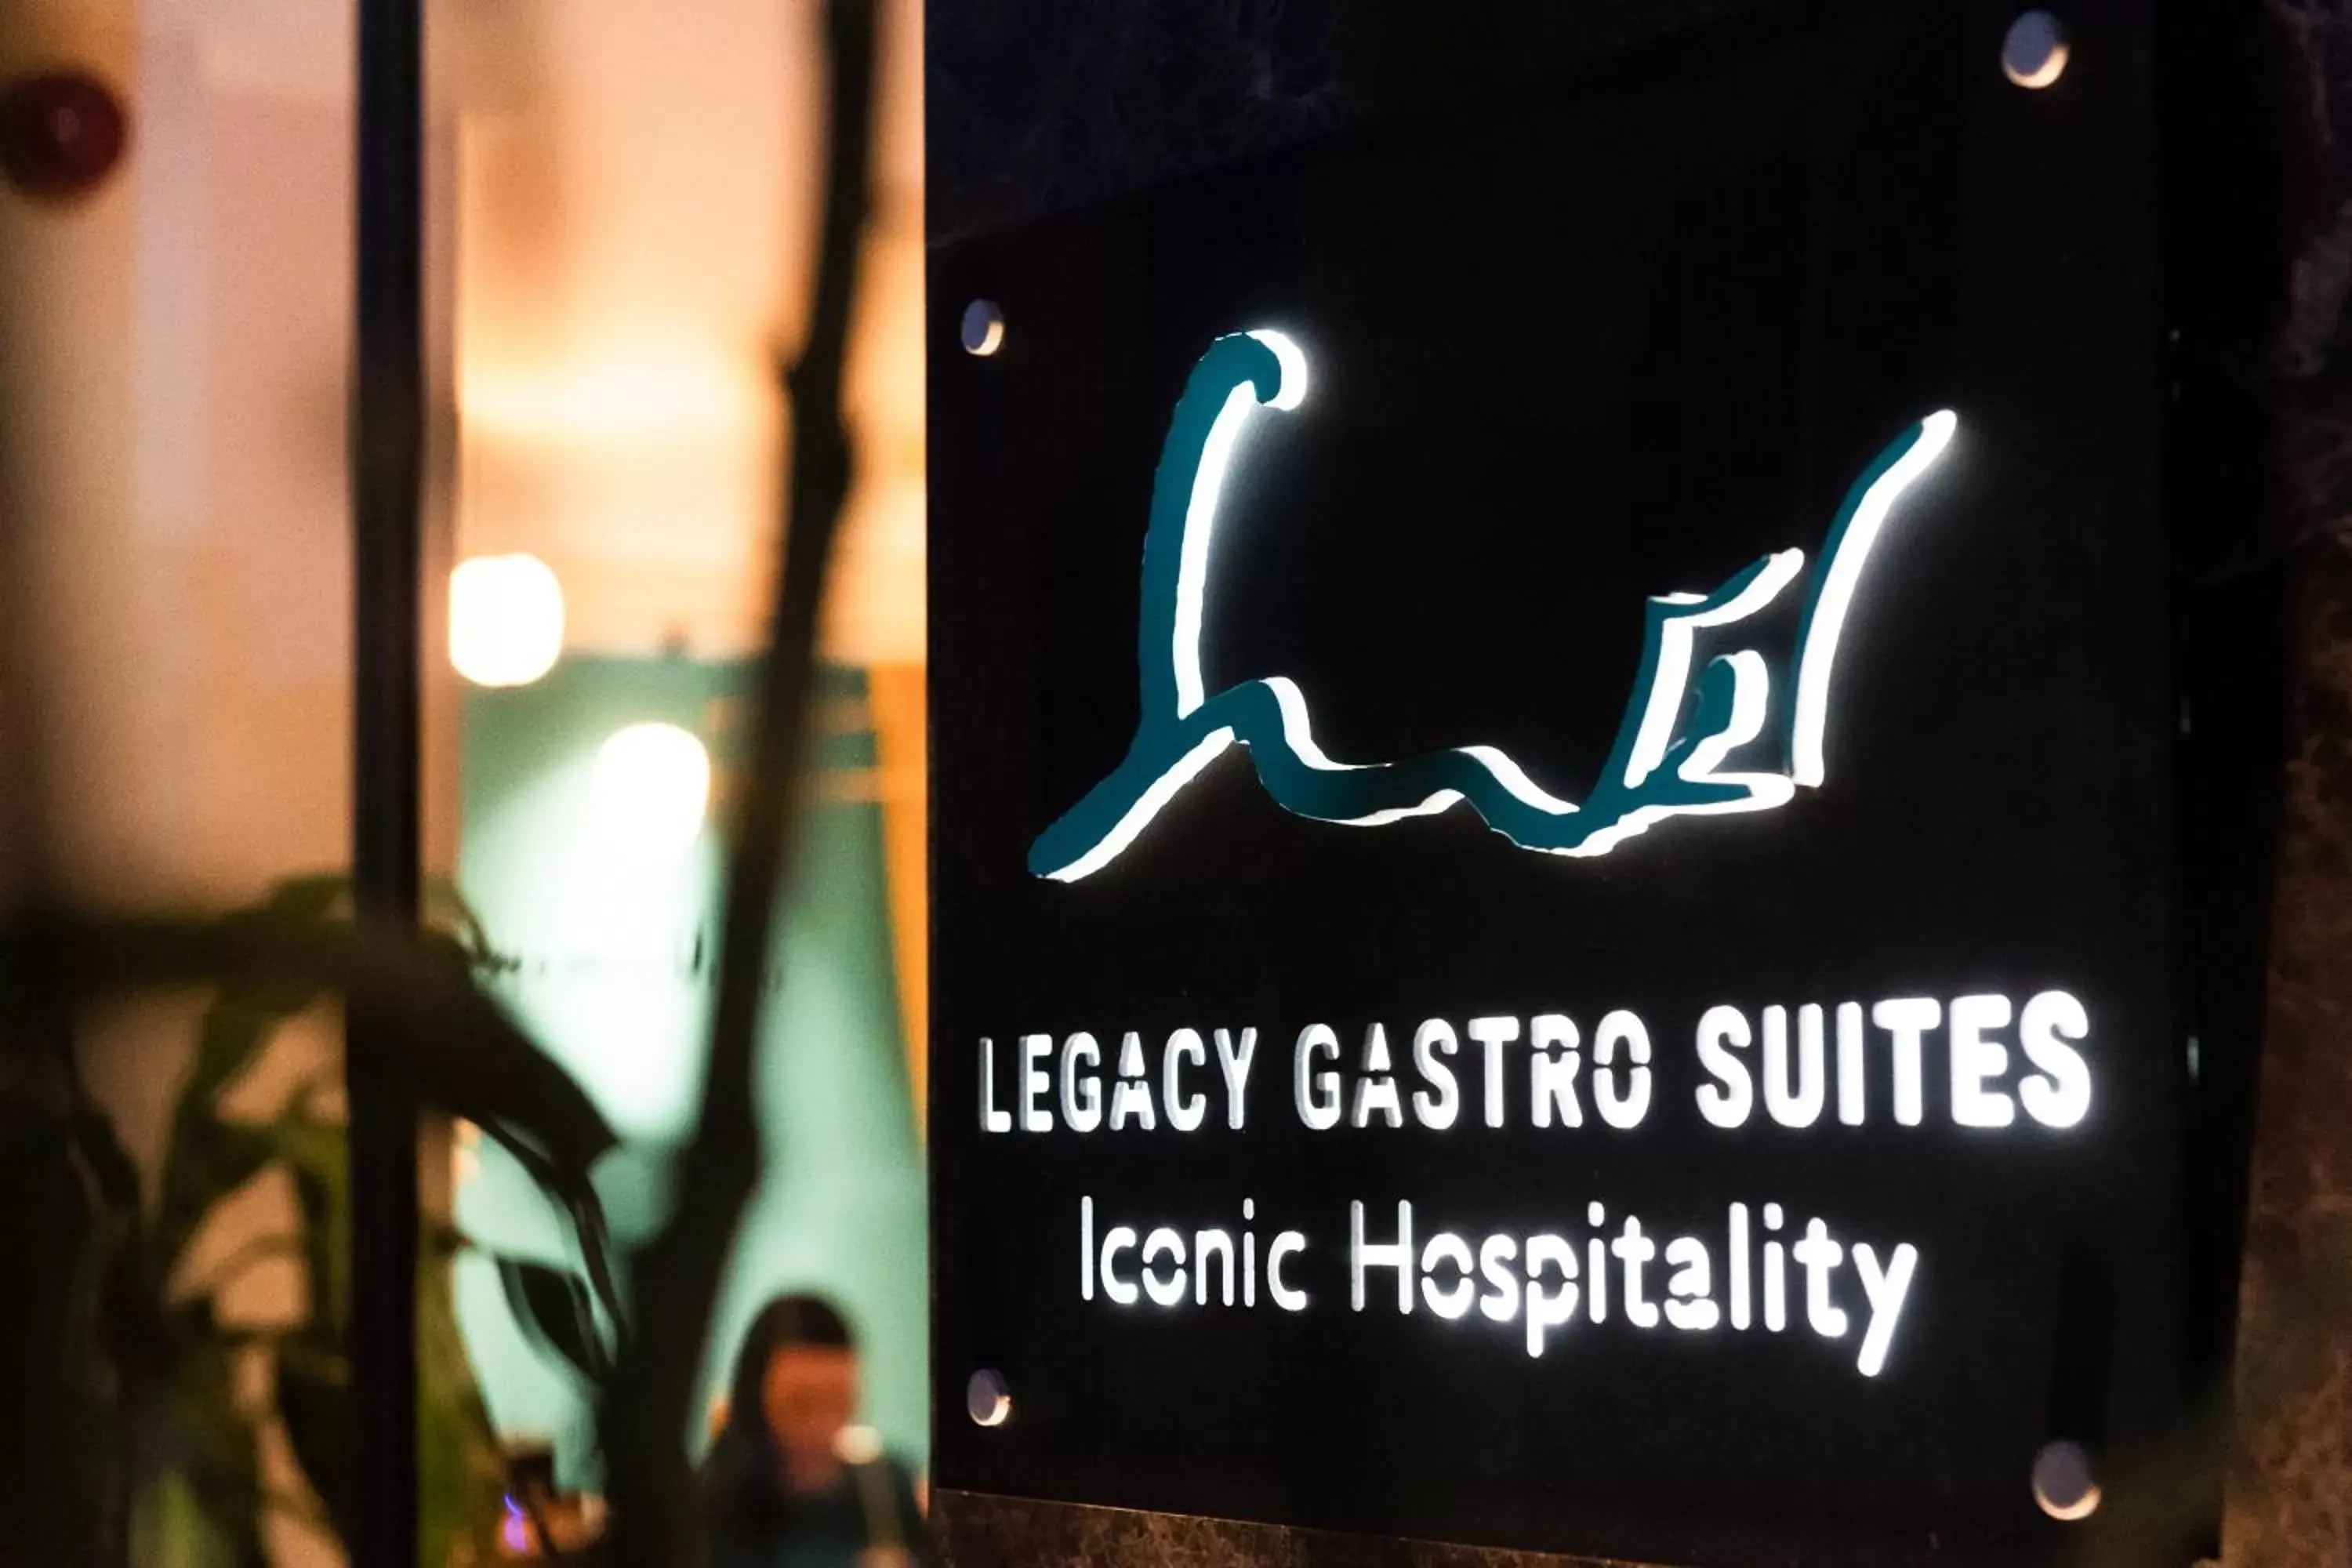 Property logo or sign in Legacy Gastro Suites